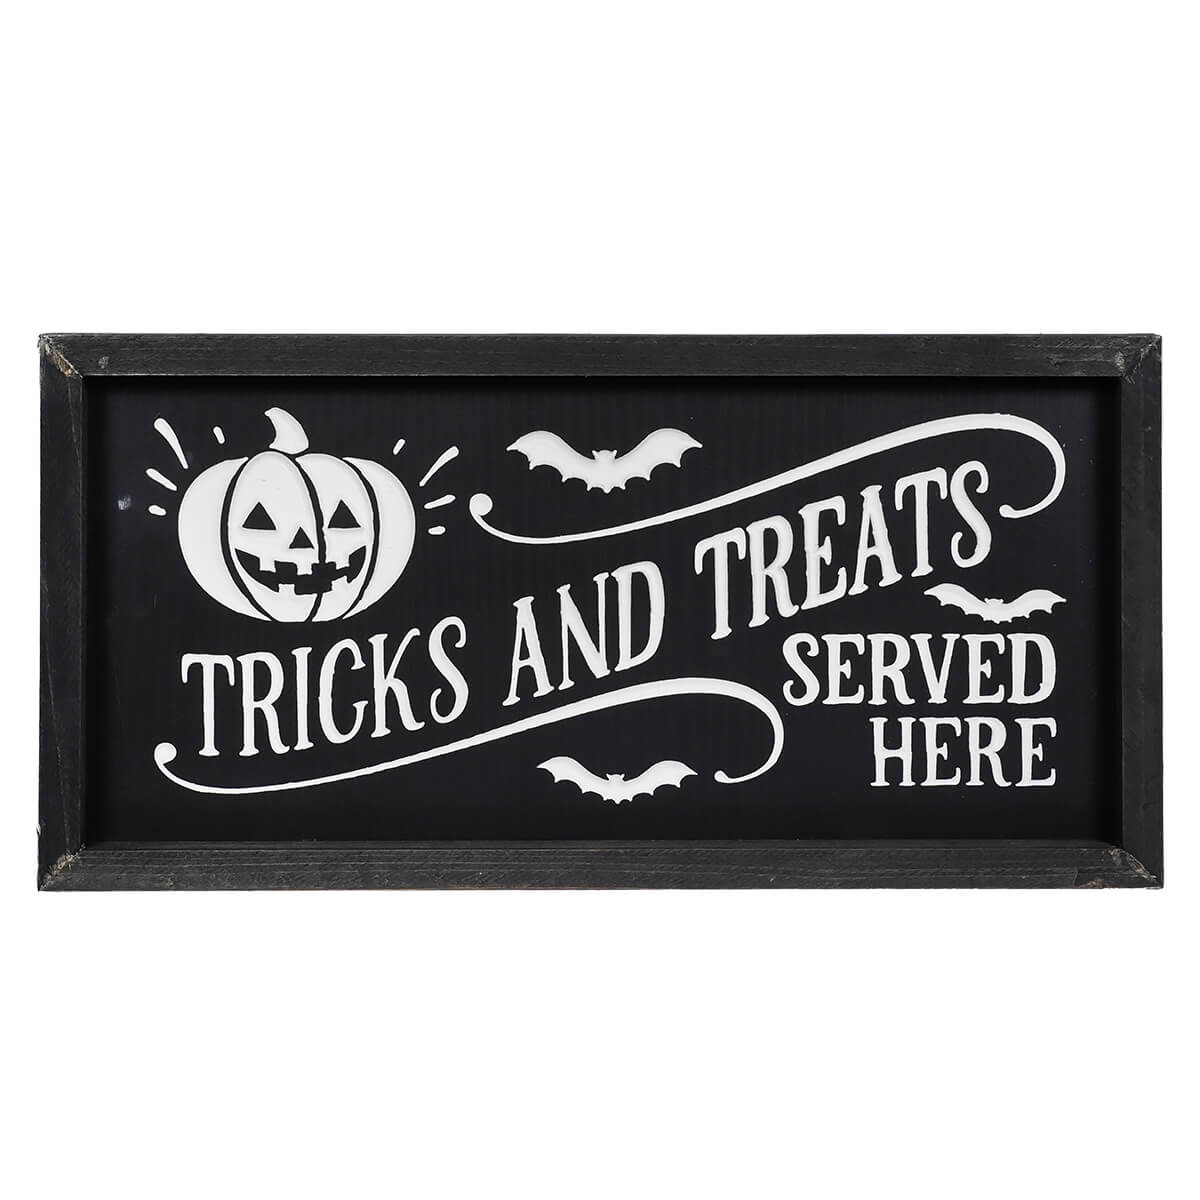 Tricks And Treats Wood Engraved Sign